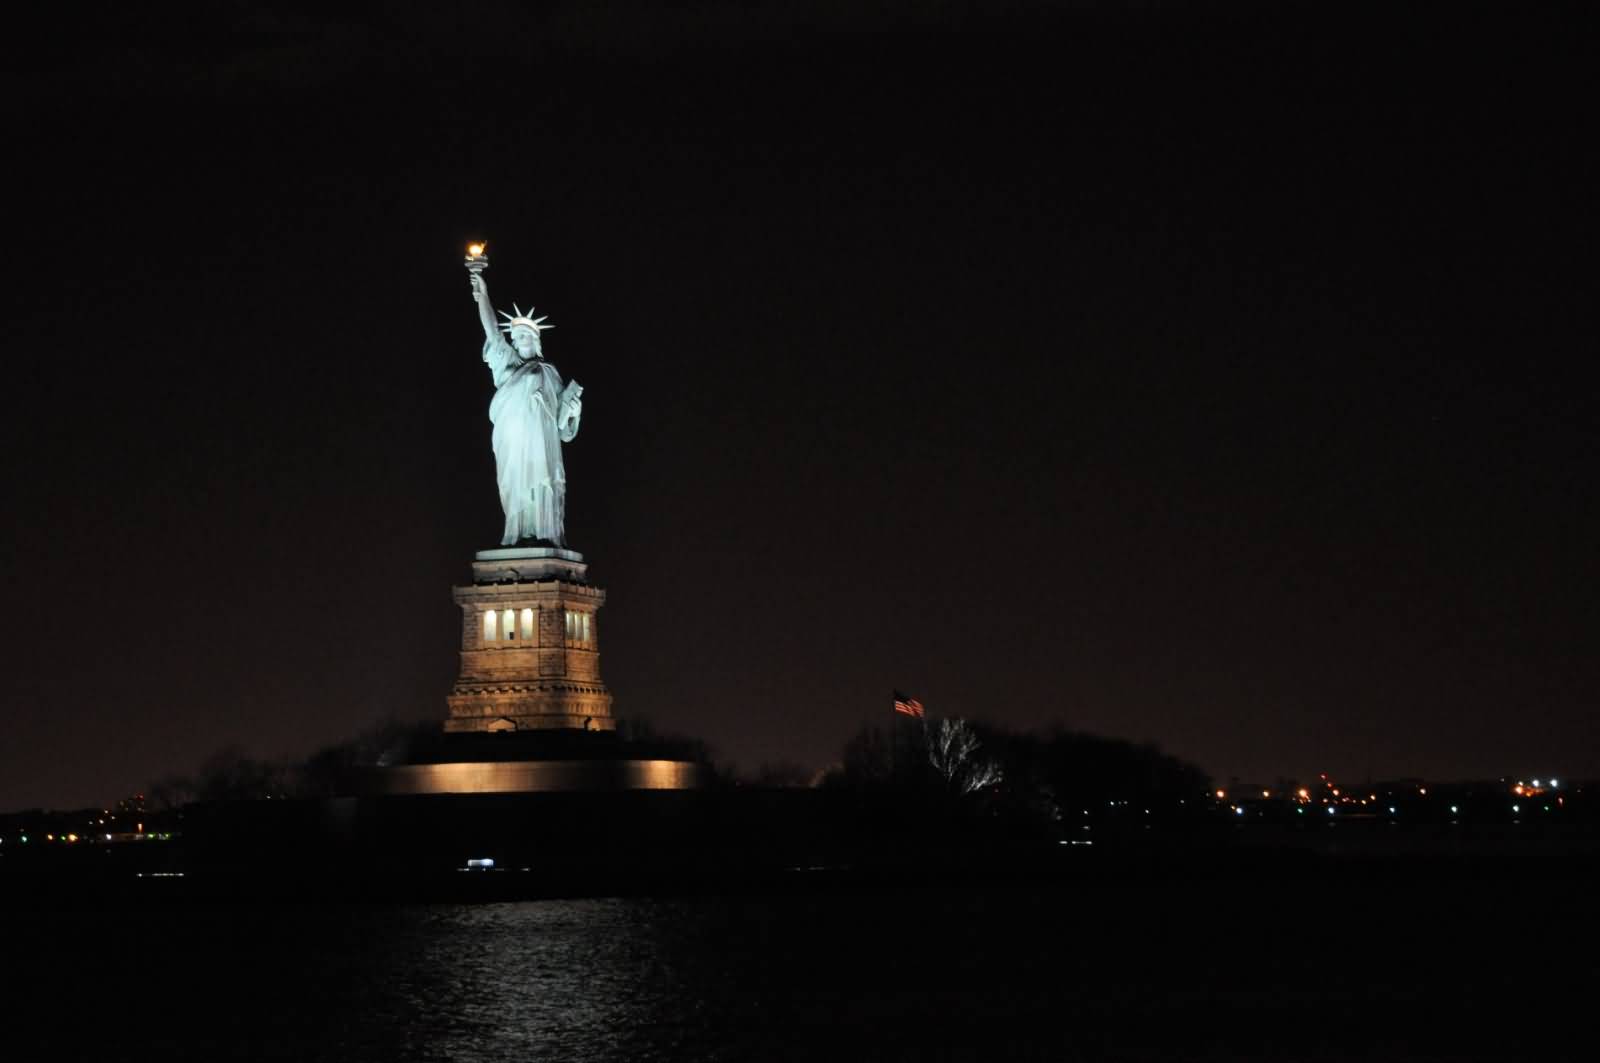 Across The River View Of Statue Of Liberty At Night